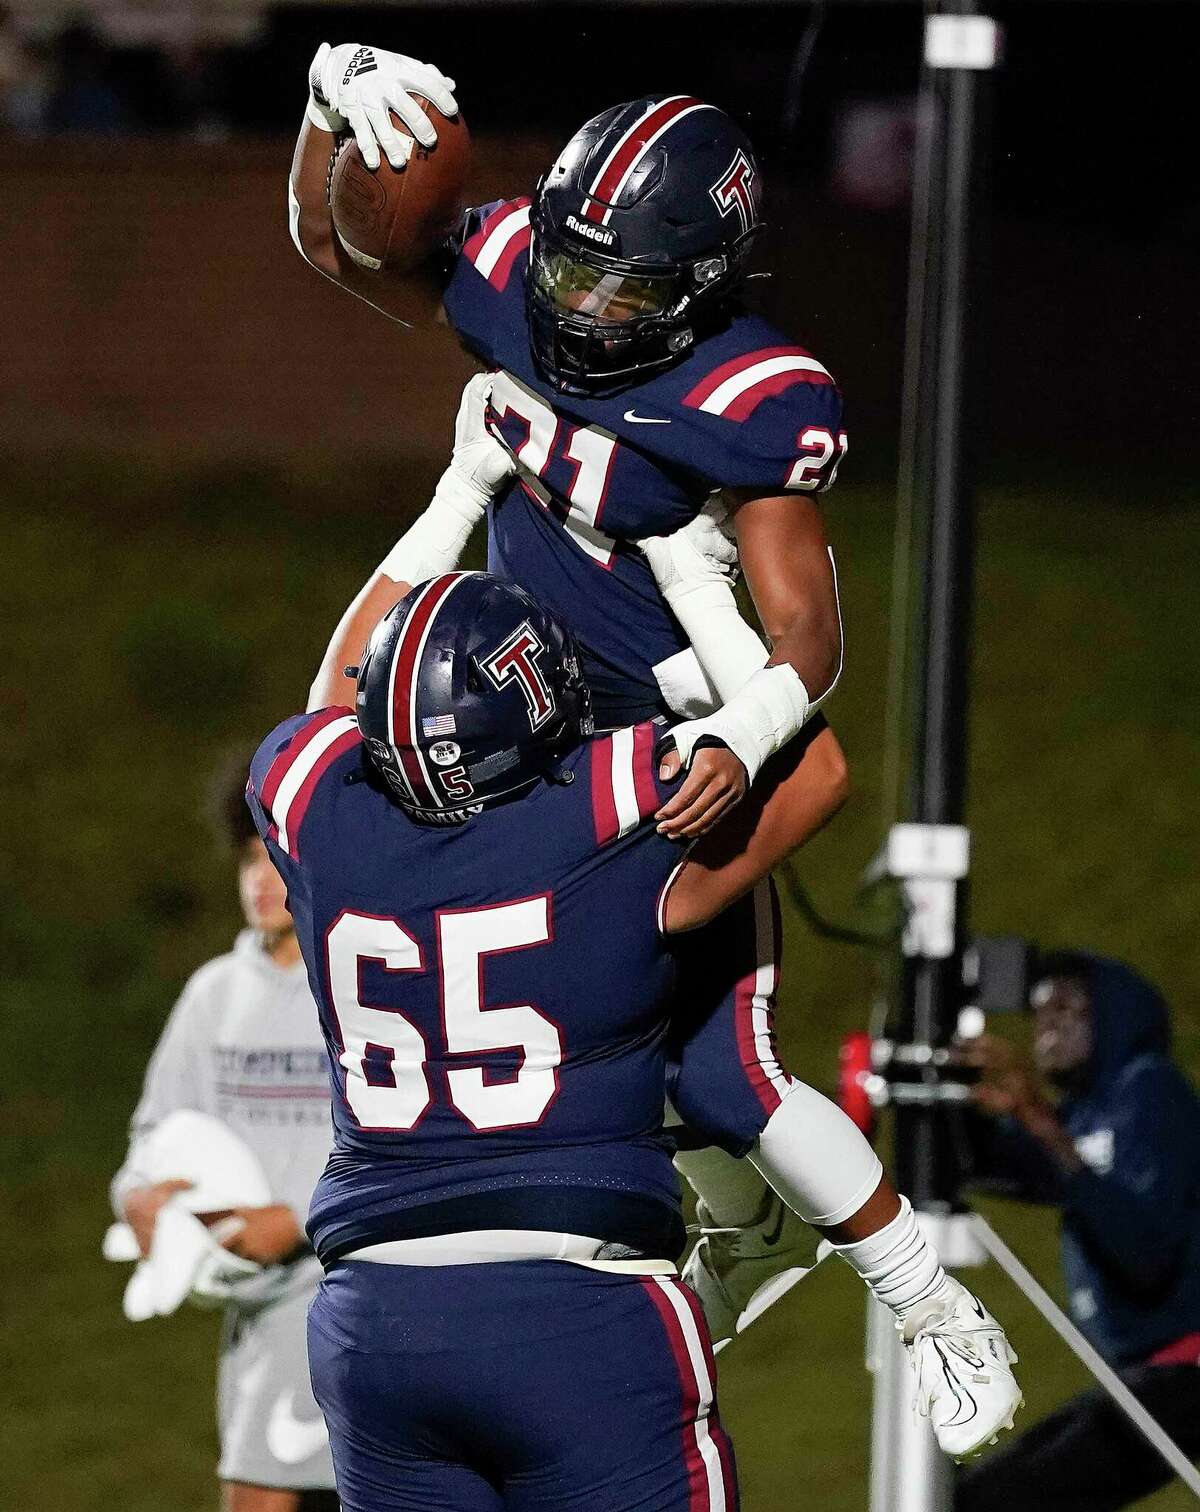 Tompkins running back Caleb Blocker, top, celebrates his touchdown with Ennes Ismail during the first half of a high school football game against Jordan, Friday, Oct. 28, 2022, in Katy.